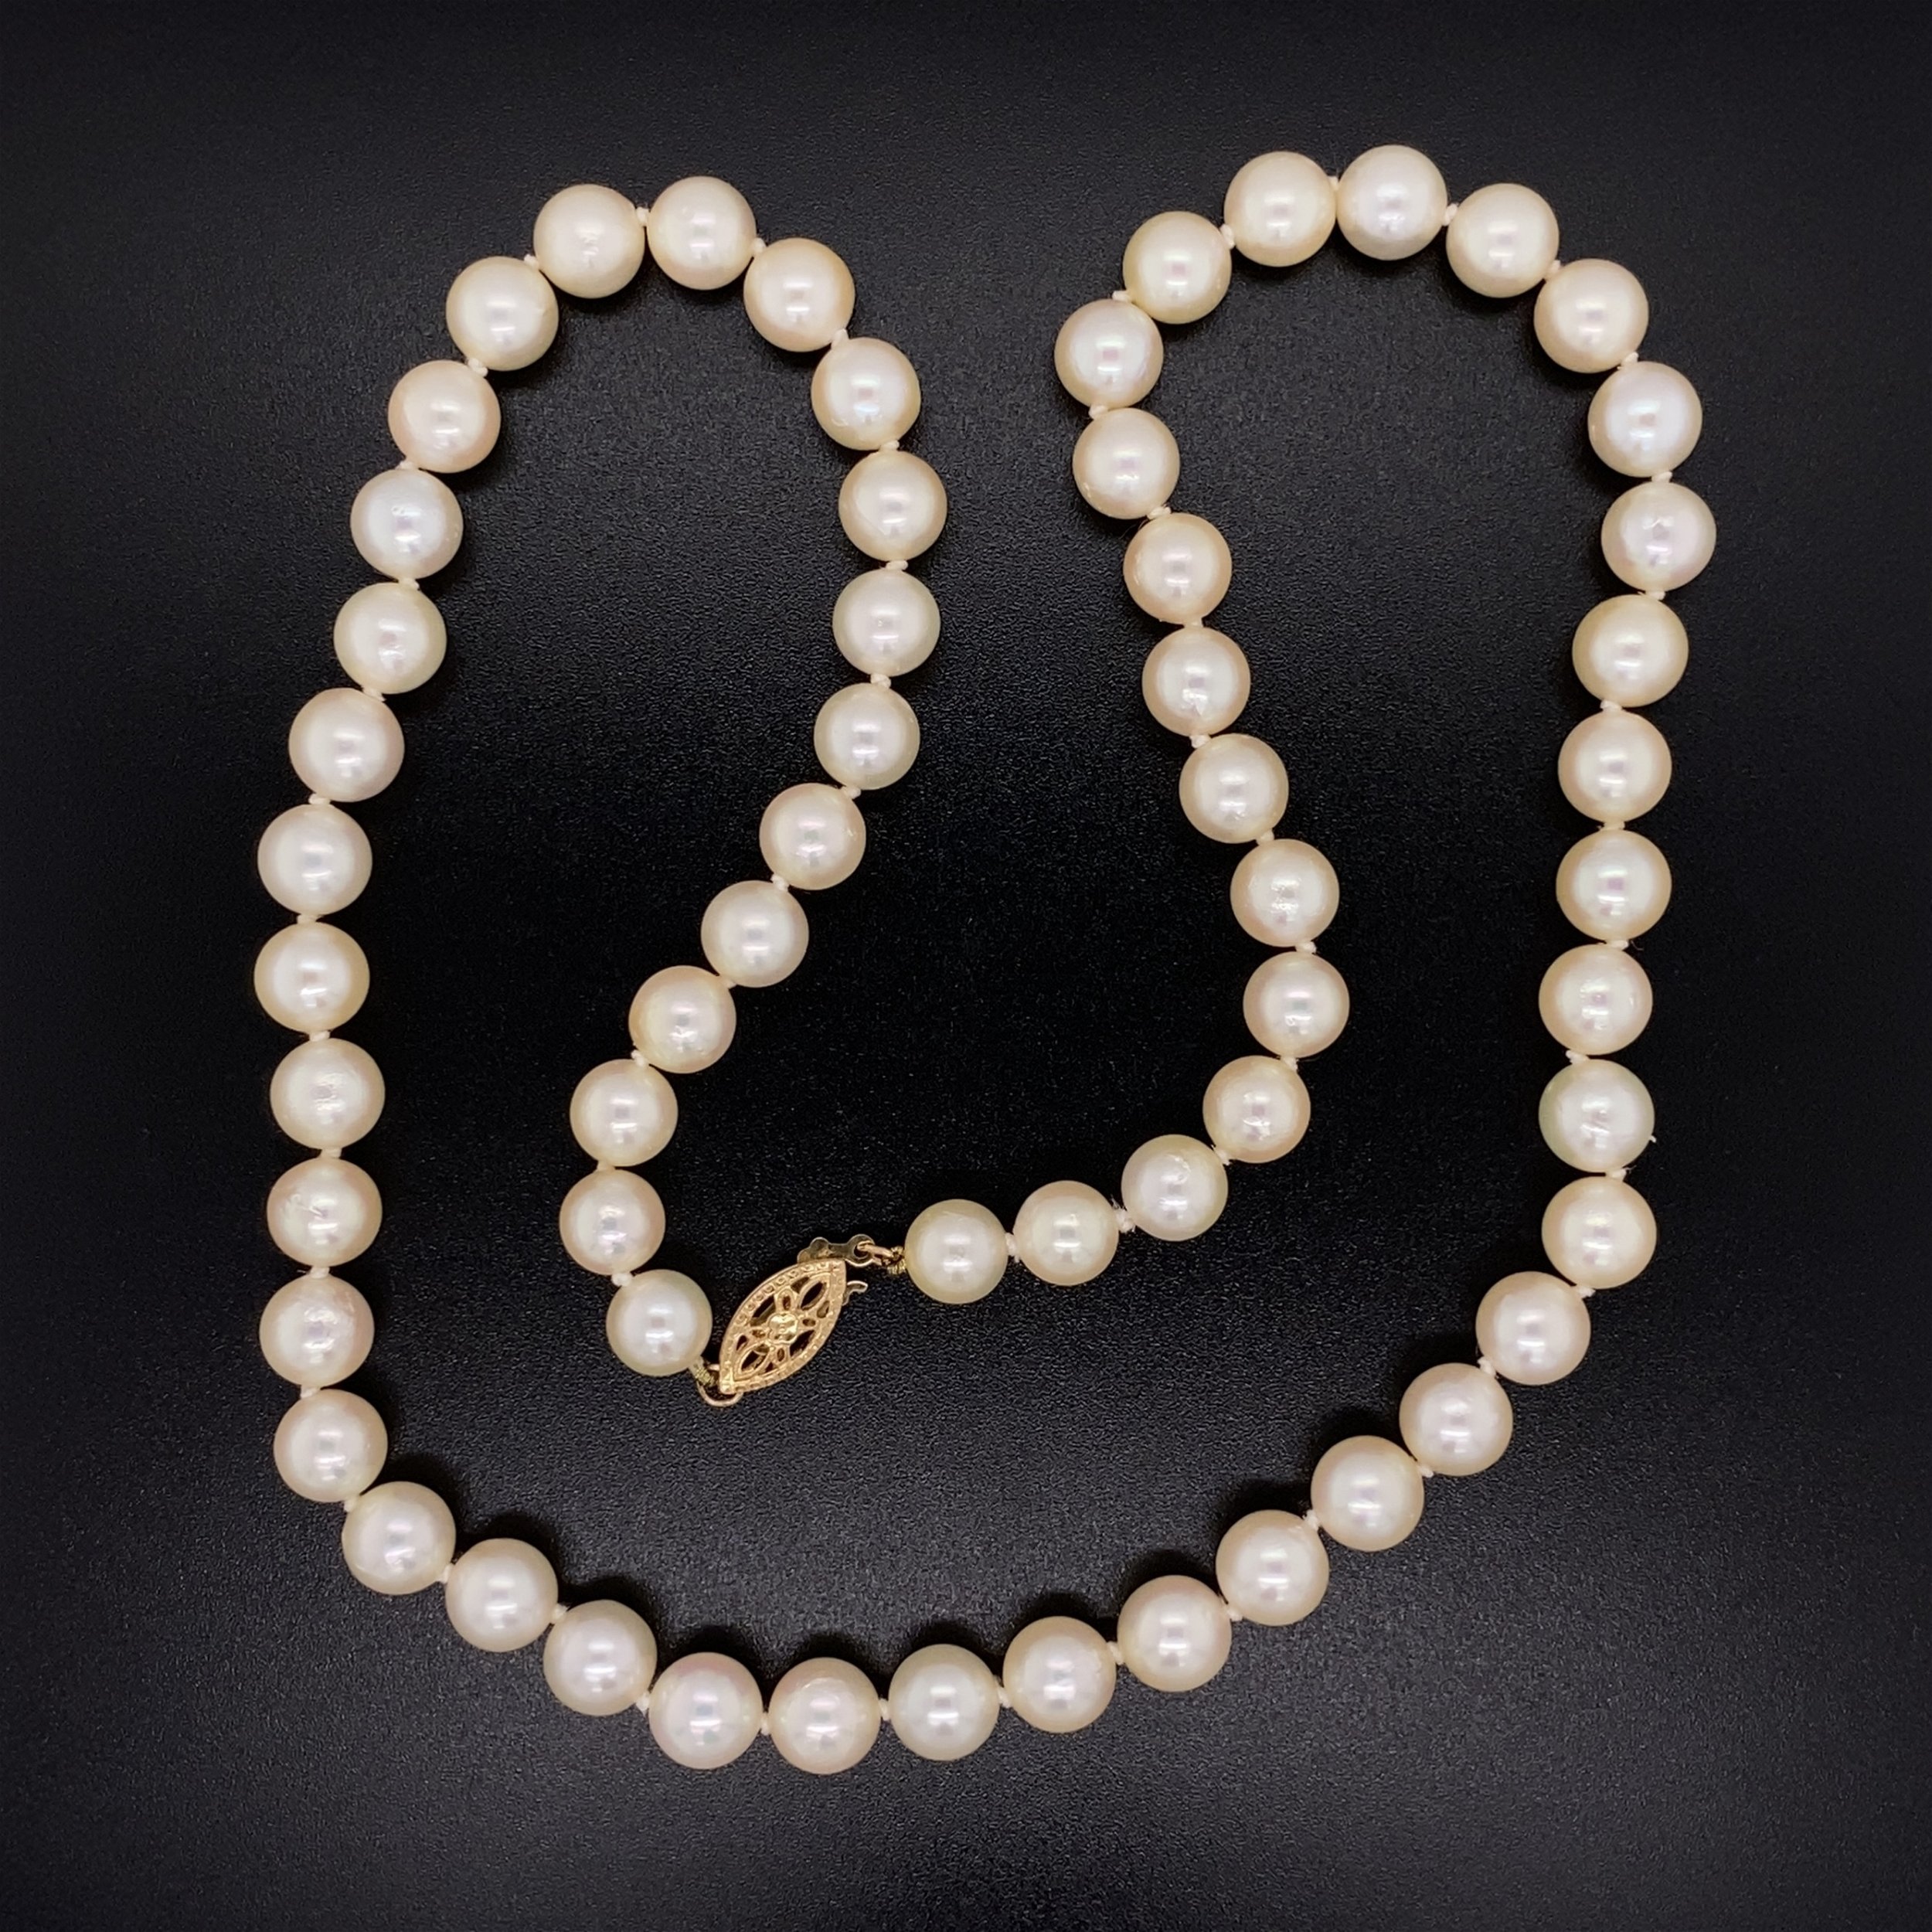 14K YG 6.9mm Cultured Pearl Necklace 27.5g, 18"